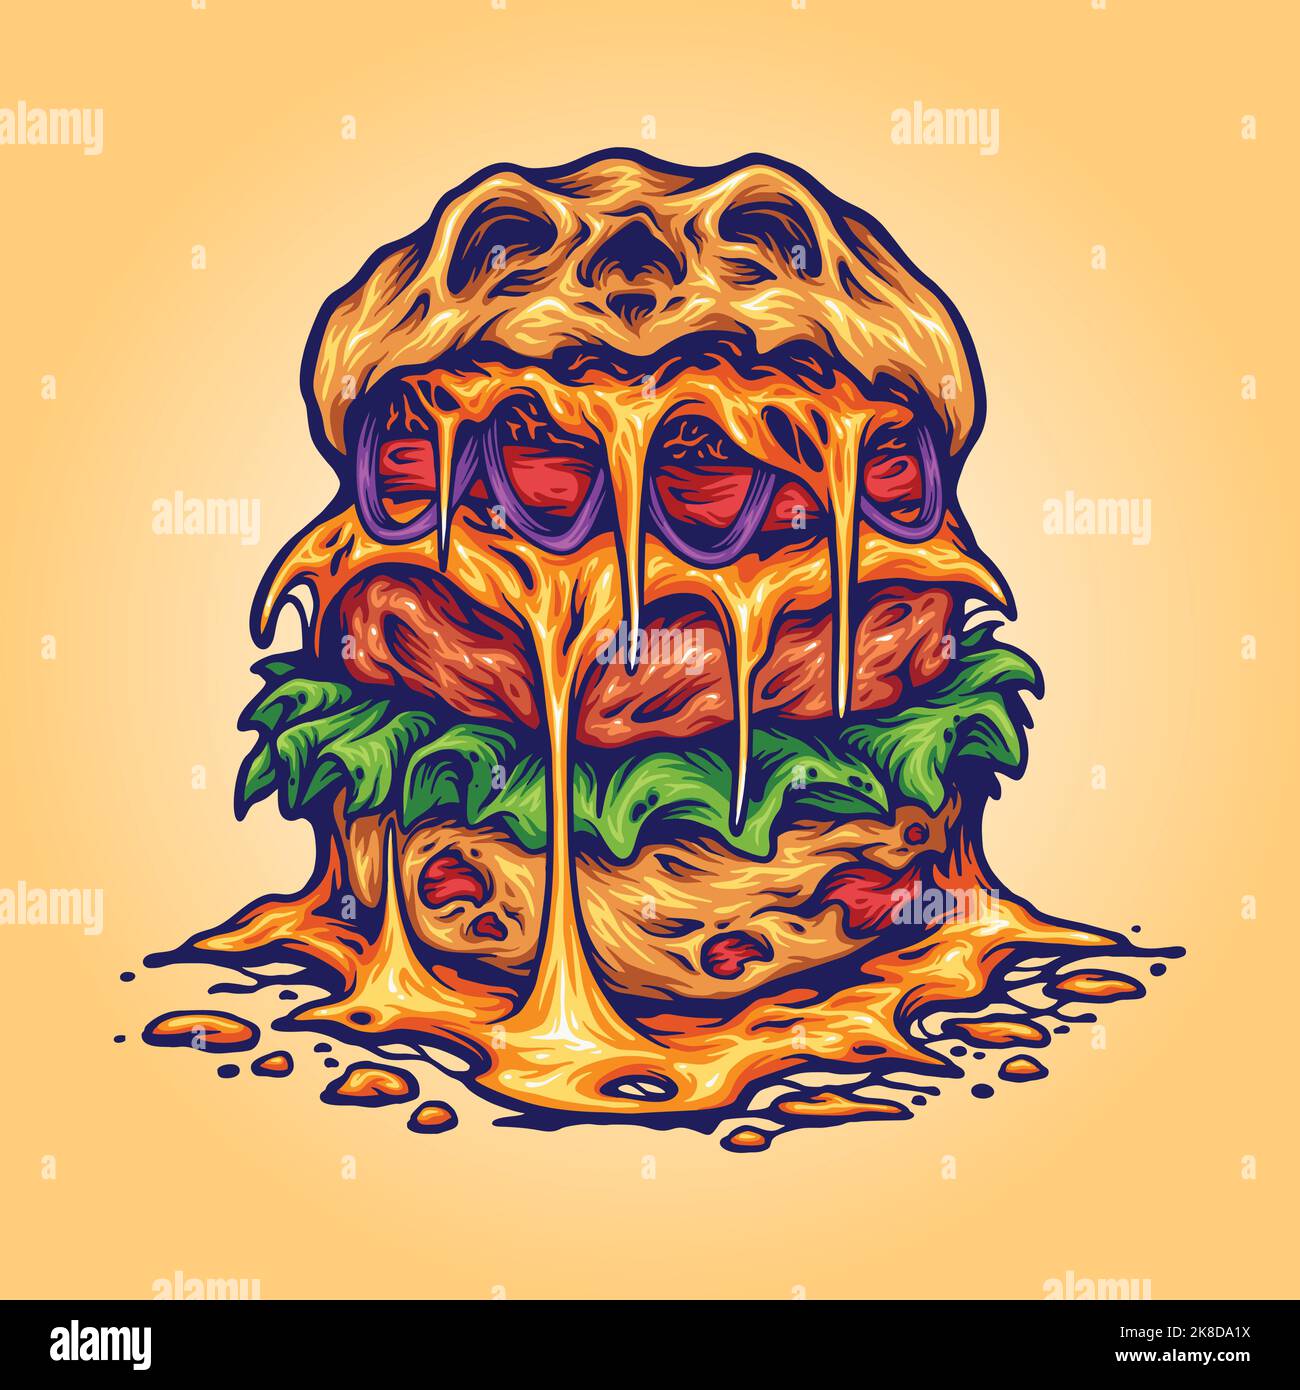 Delicious scary monster burger illustration vector illustrations for your work logo, merchandise t-shirt, stickers and label designs, poster Stock Vector